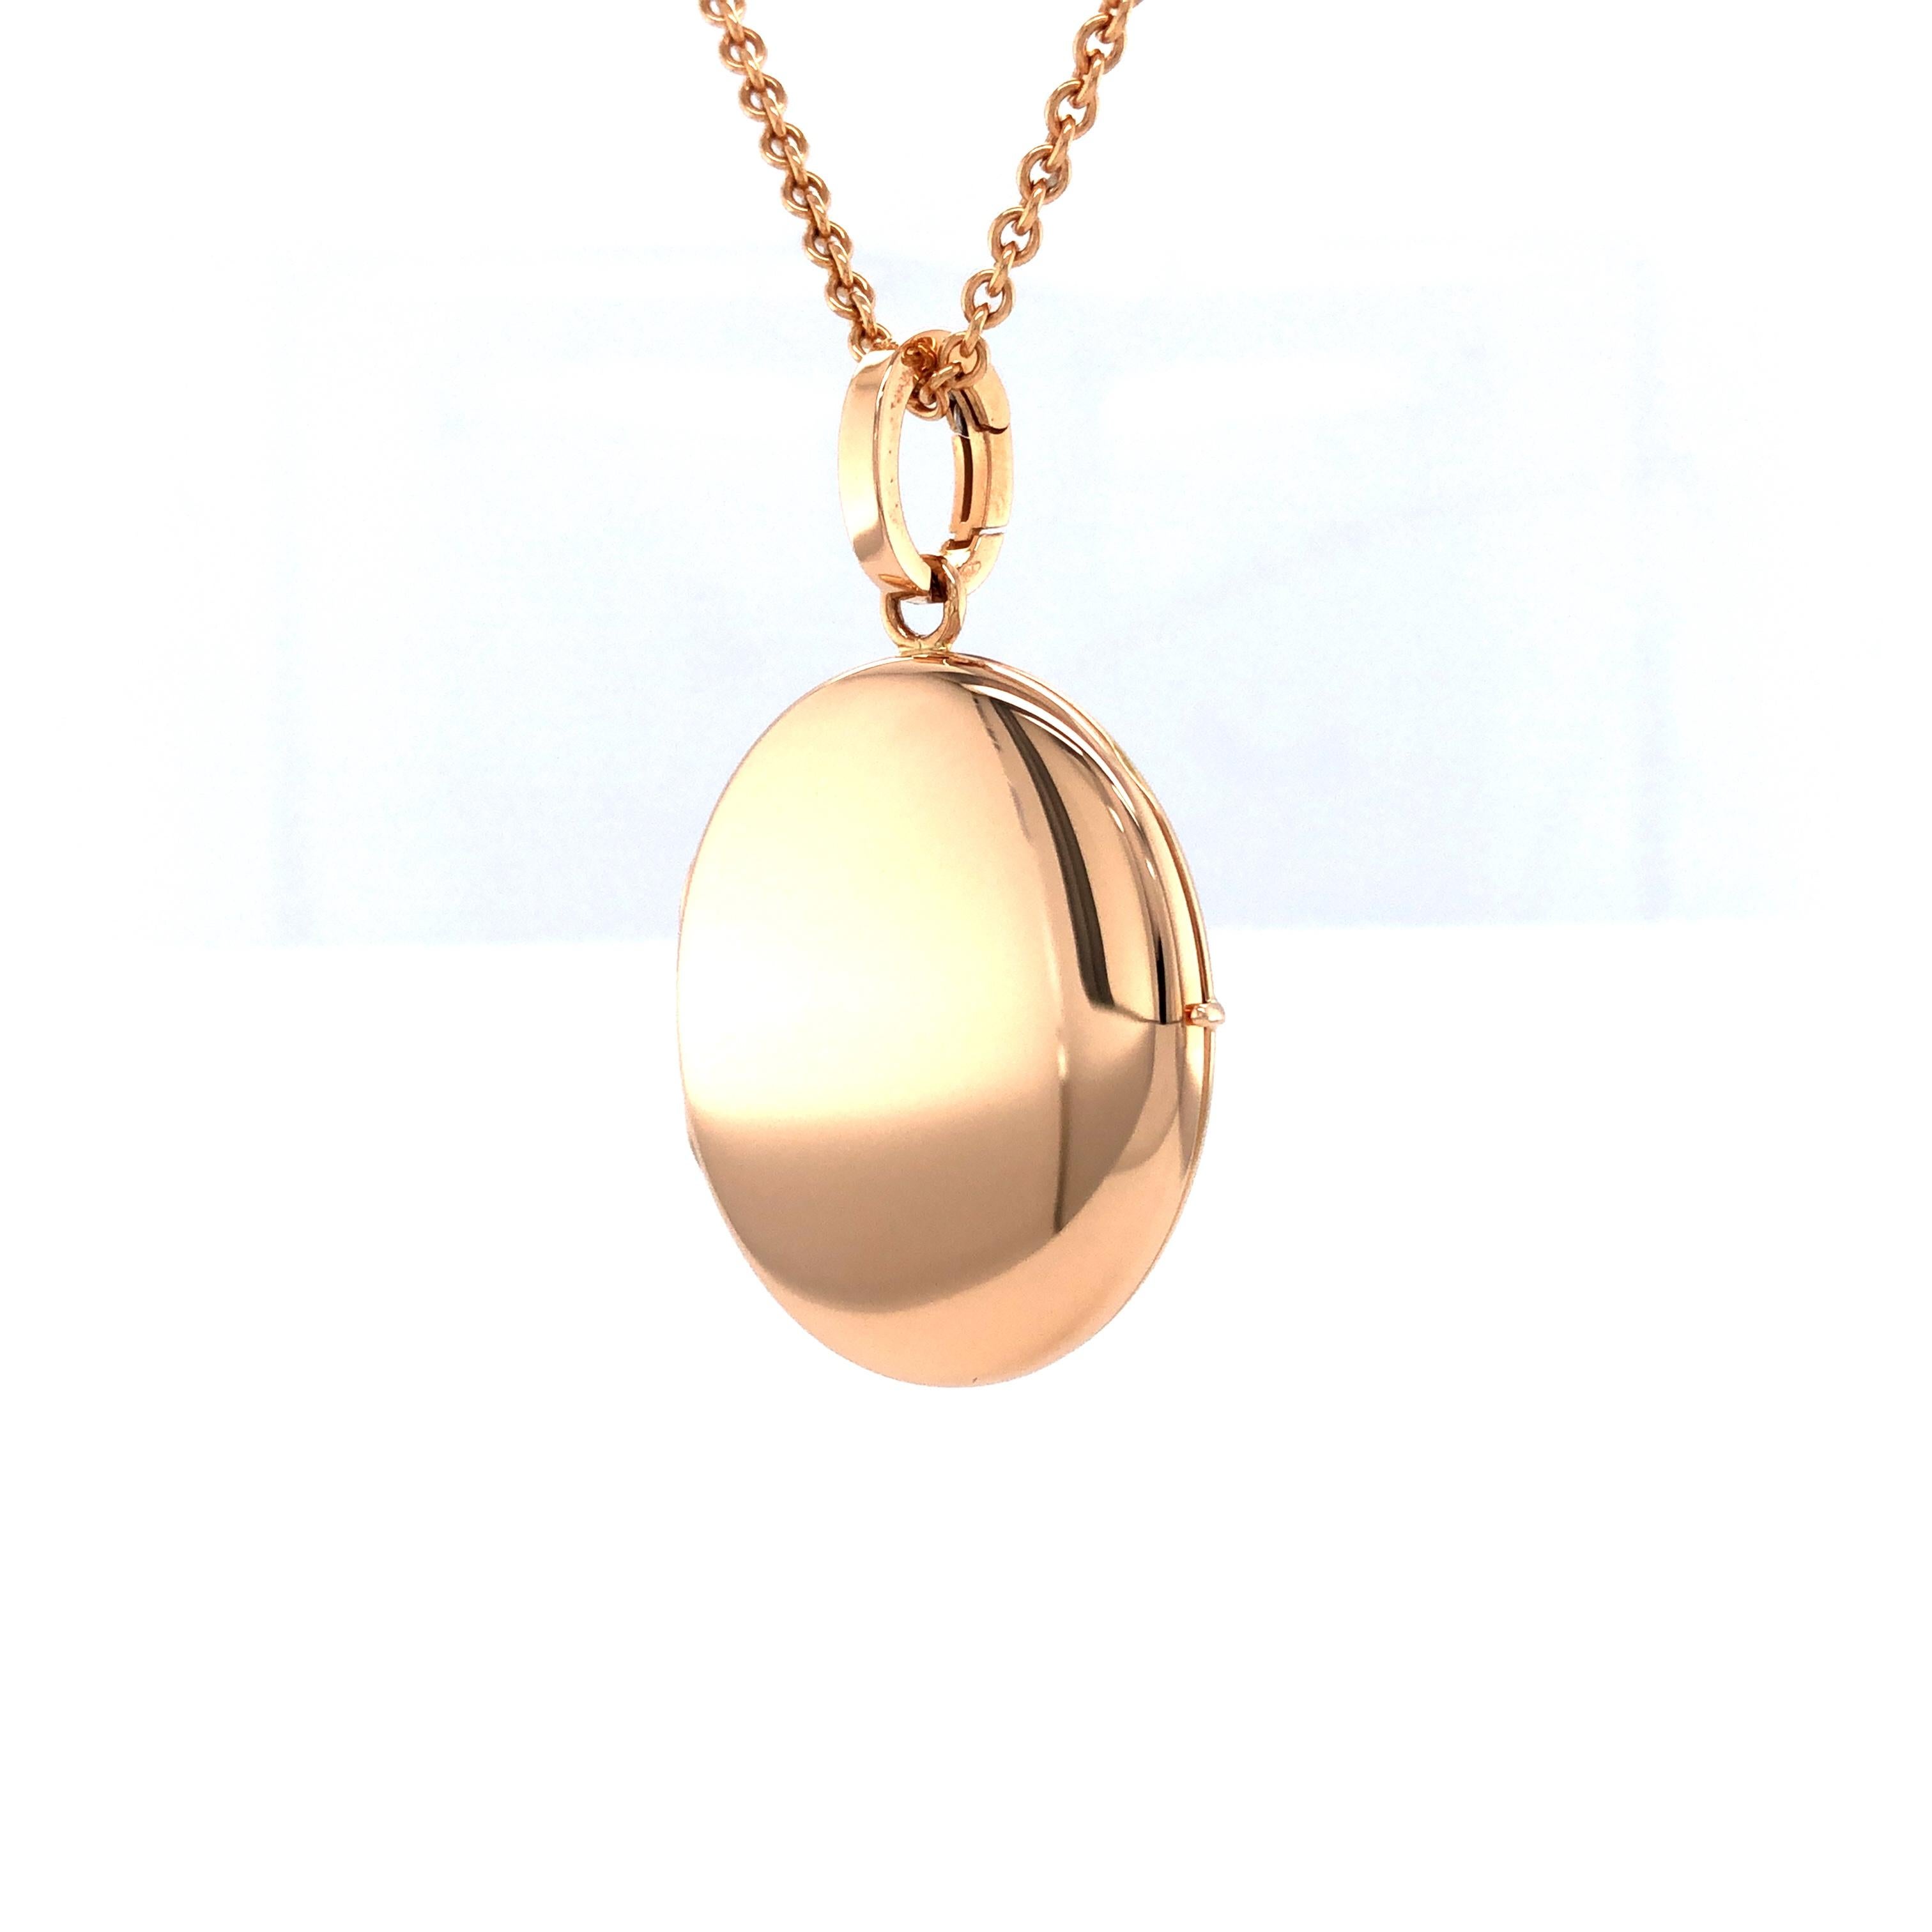 Collier médaillon ovale, or rose 18 carats